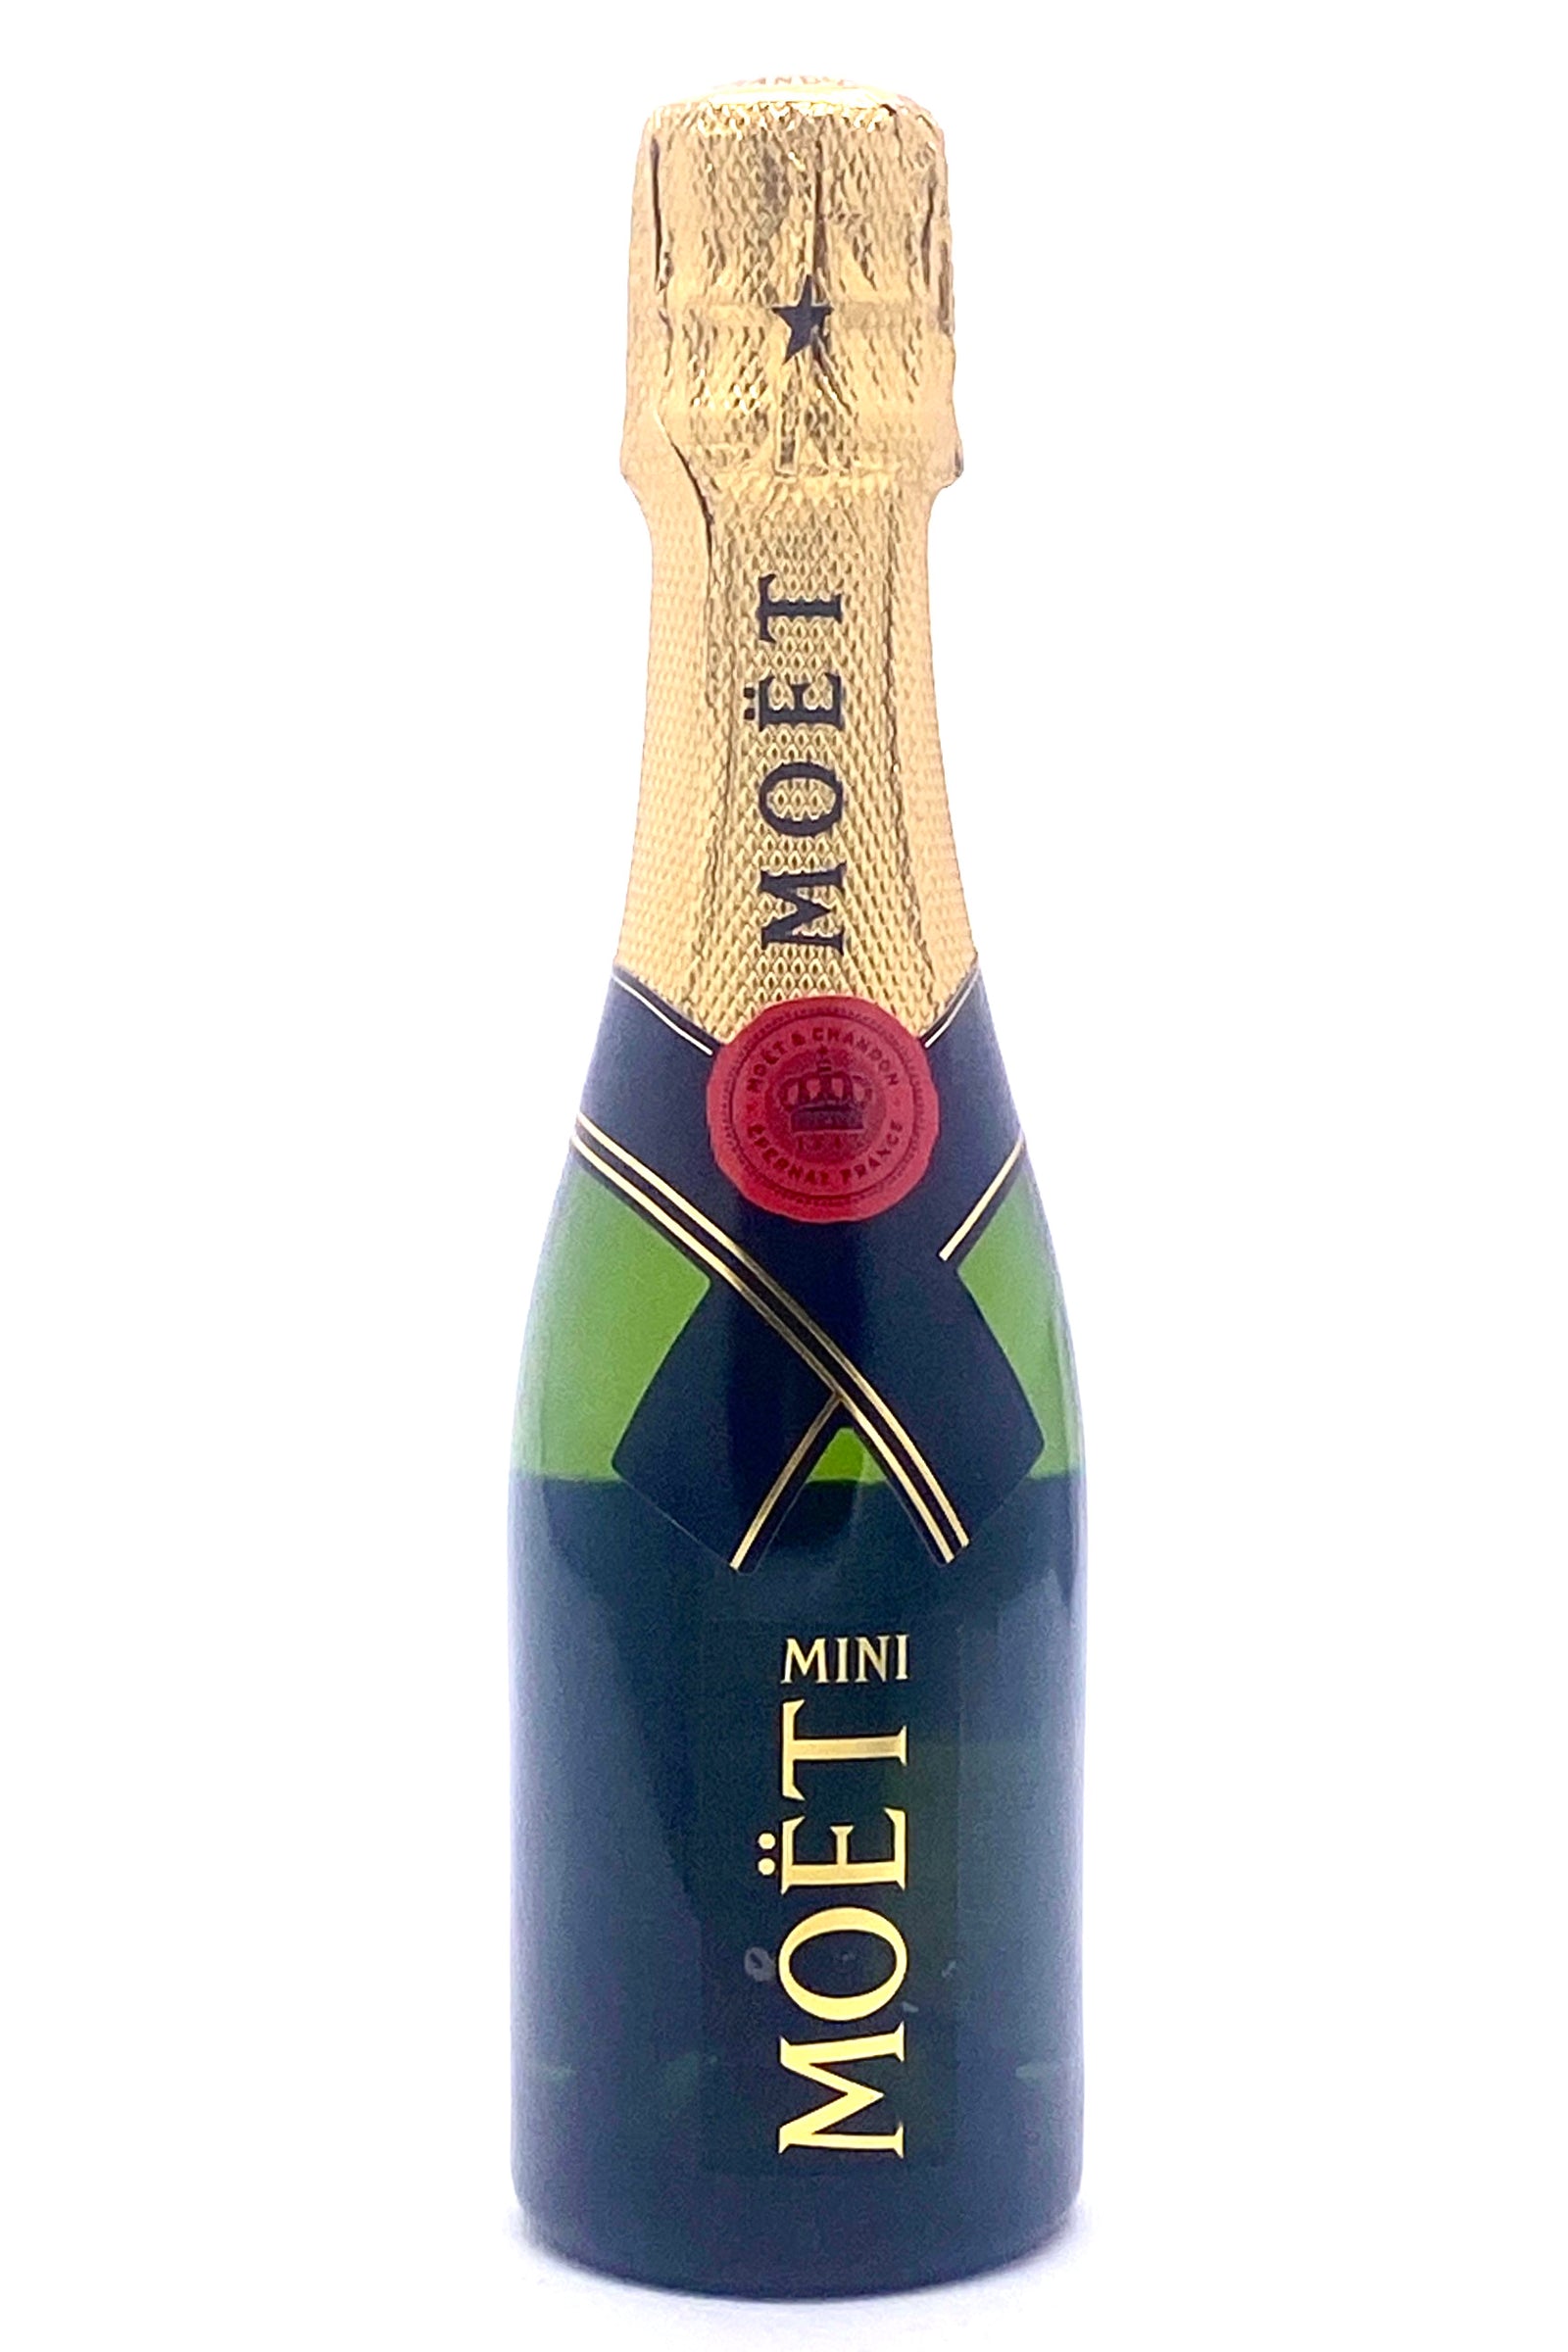 Wines Wines & Blackwell\'s Chandon - Spirits Champagnes Celebrate and with Moet Sparkling